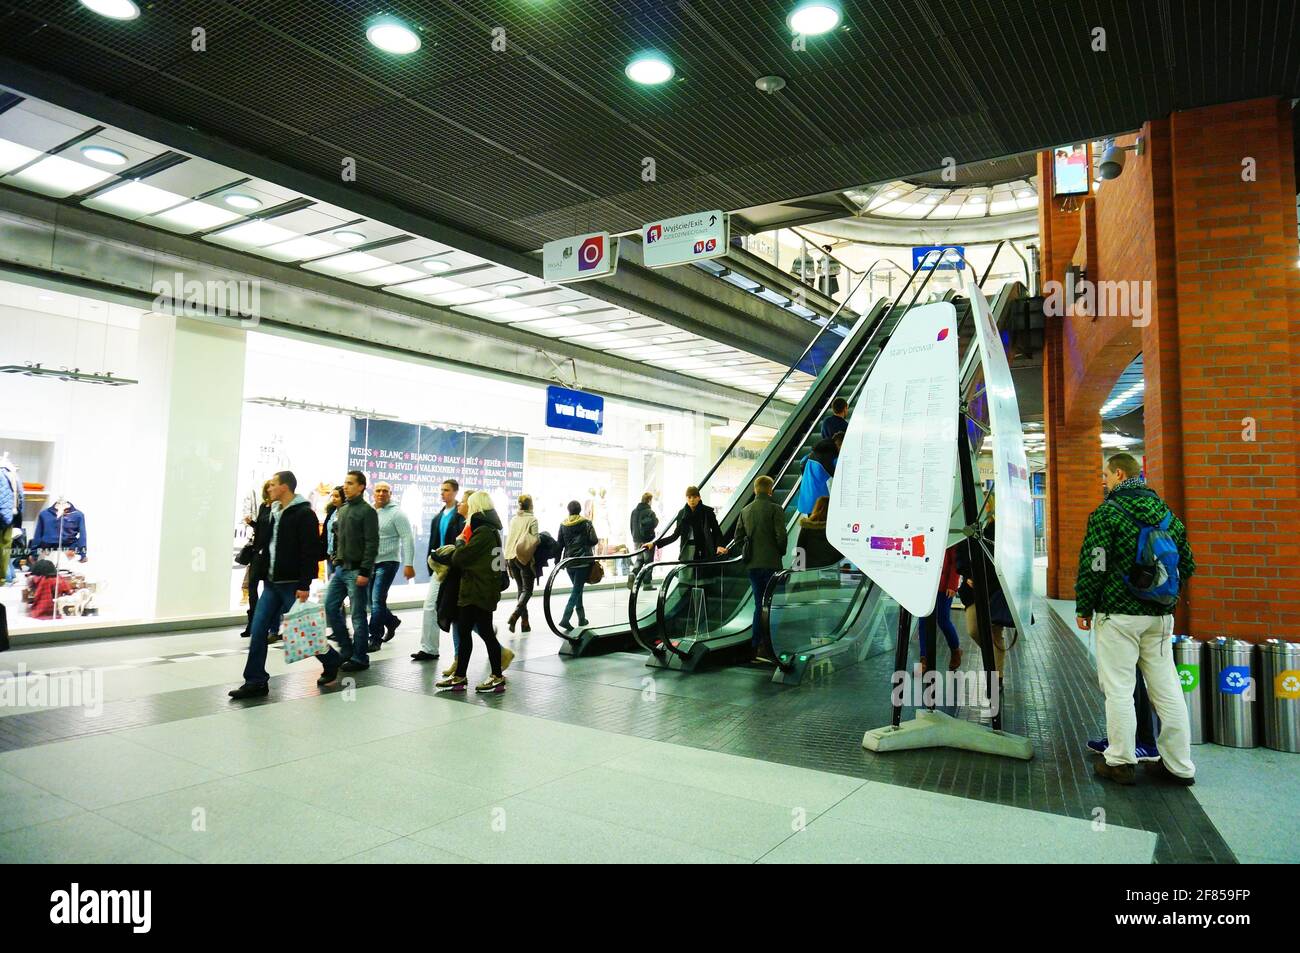 POZNAN, POLAND - Feb 21, 2014: Walking people close by a escalator in the Stary Browar shopping mall Stock Photo